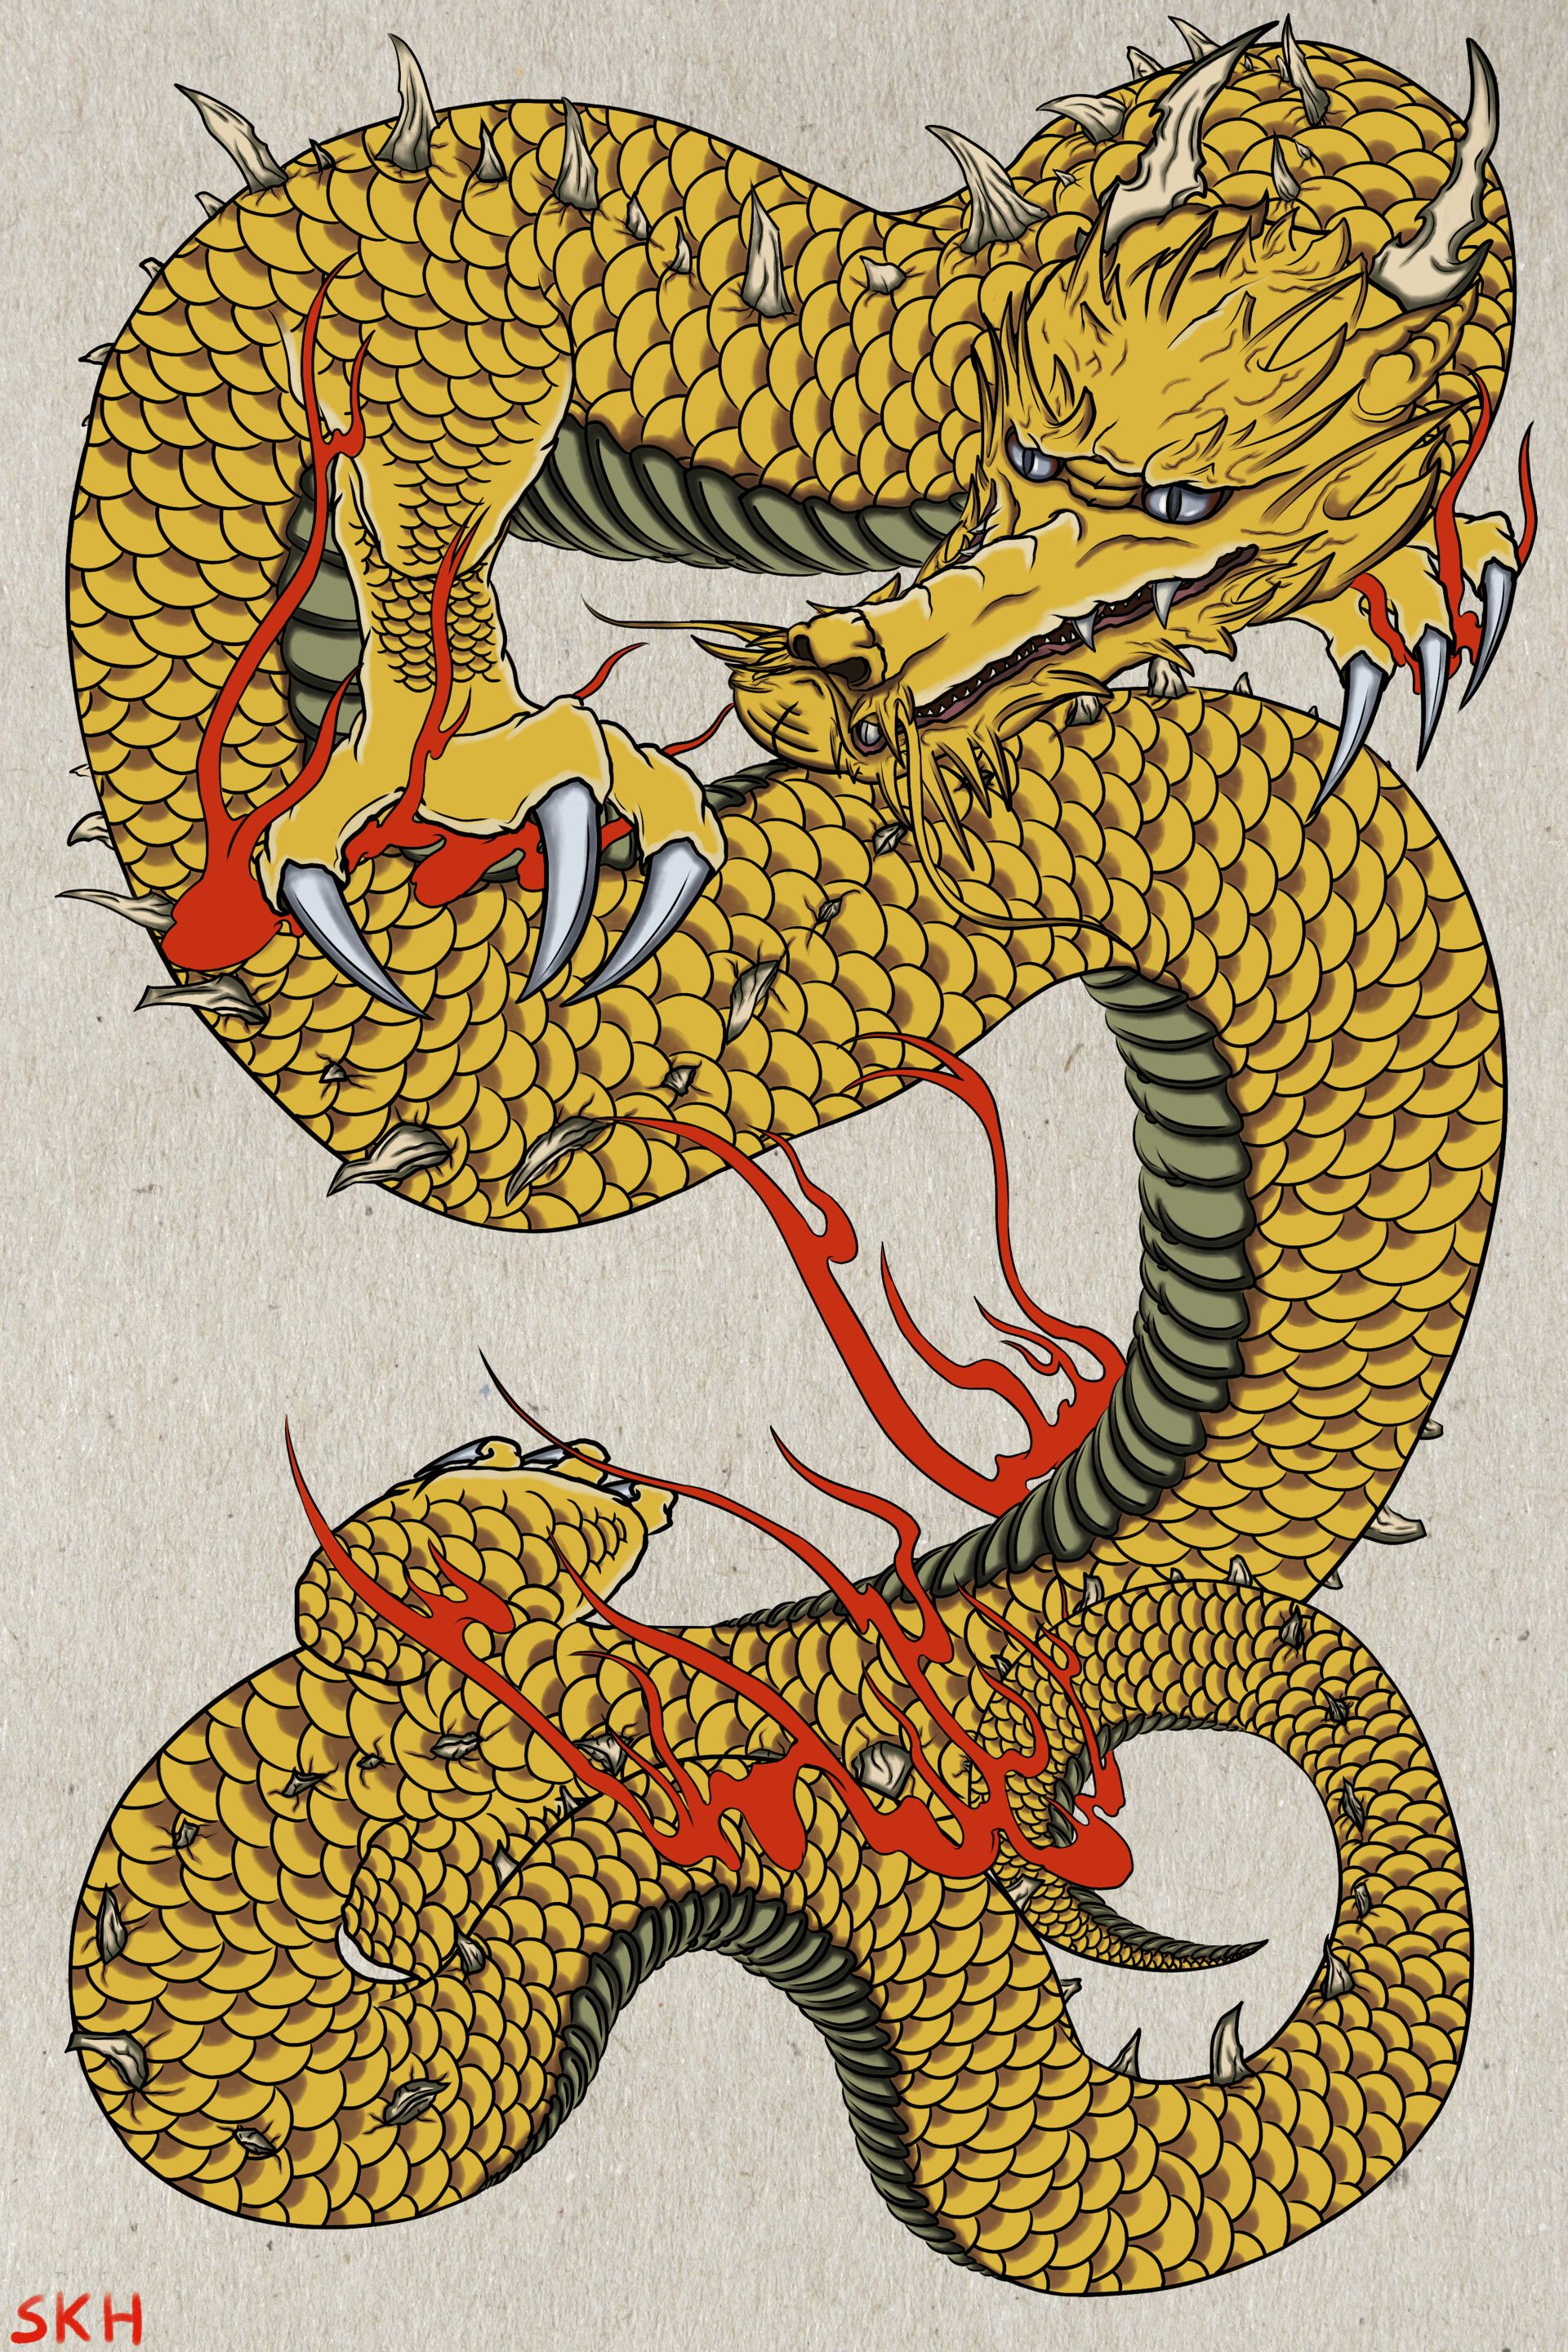 A yellow dragon with red flames and sharp teeth - Dragon